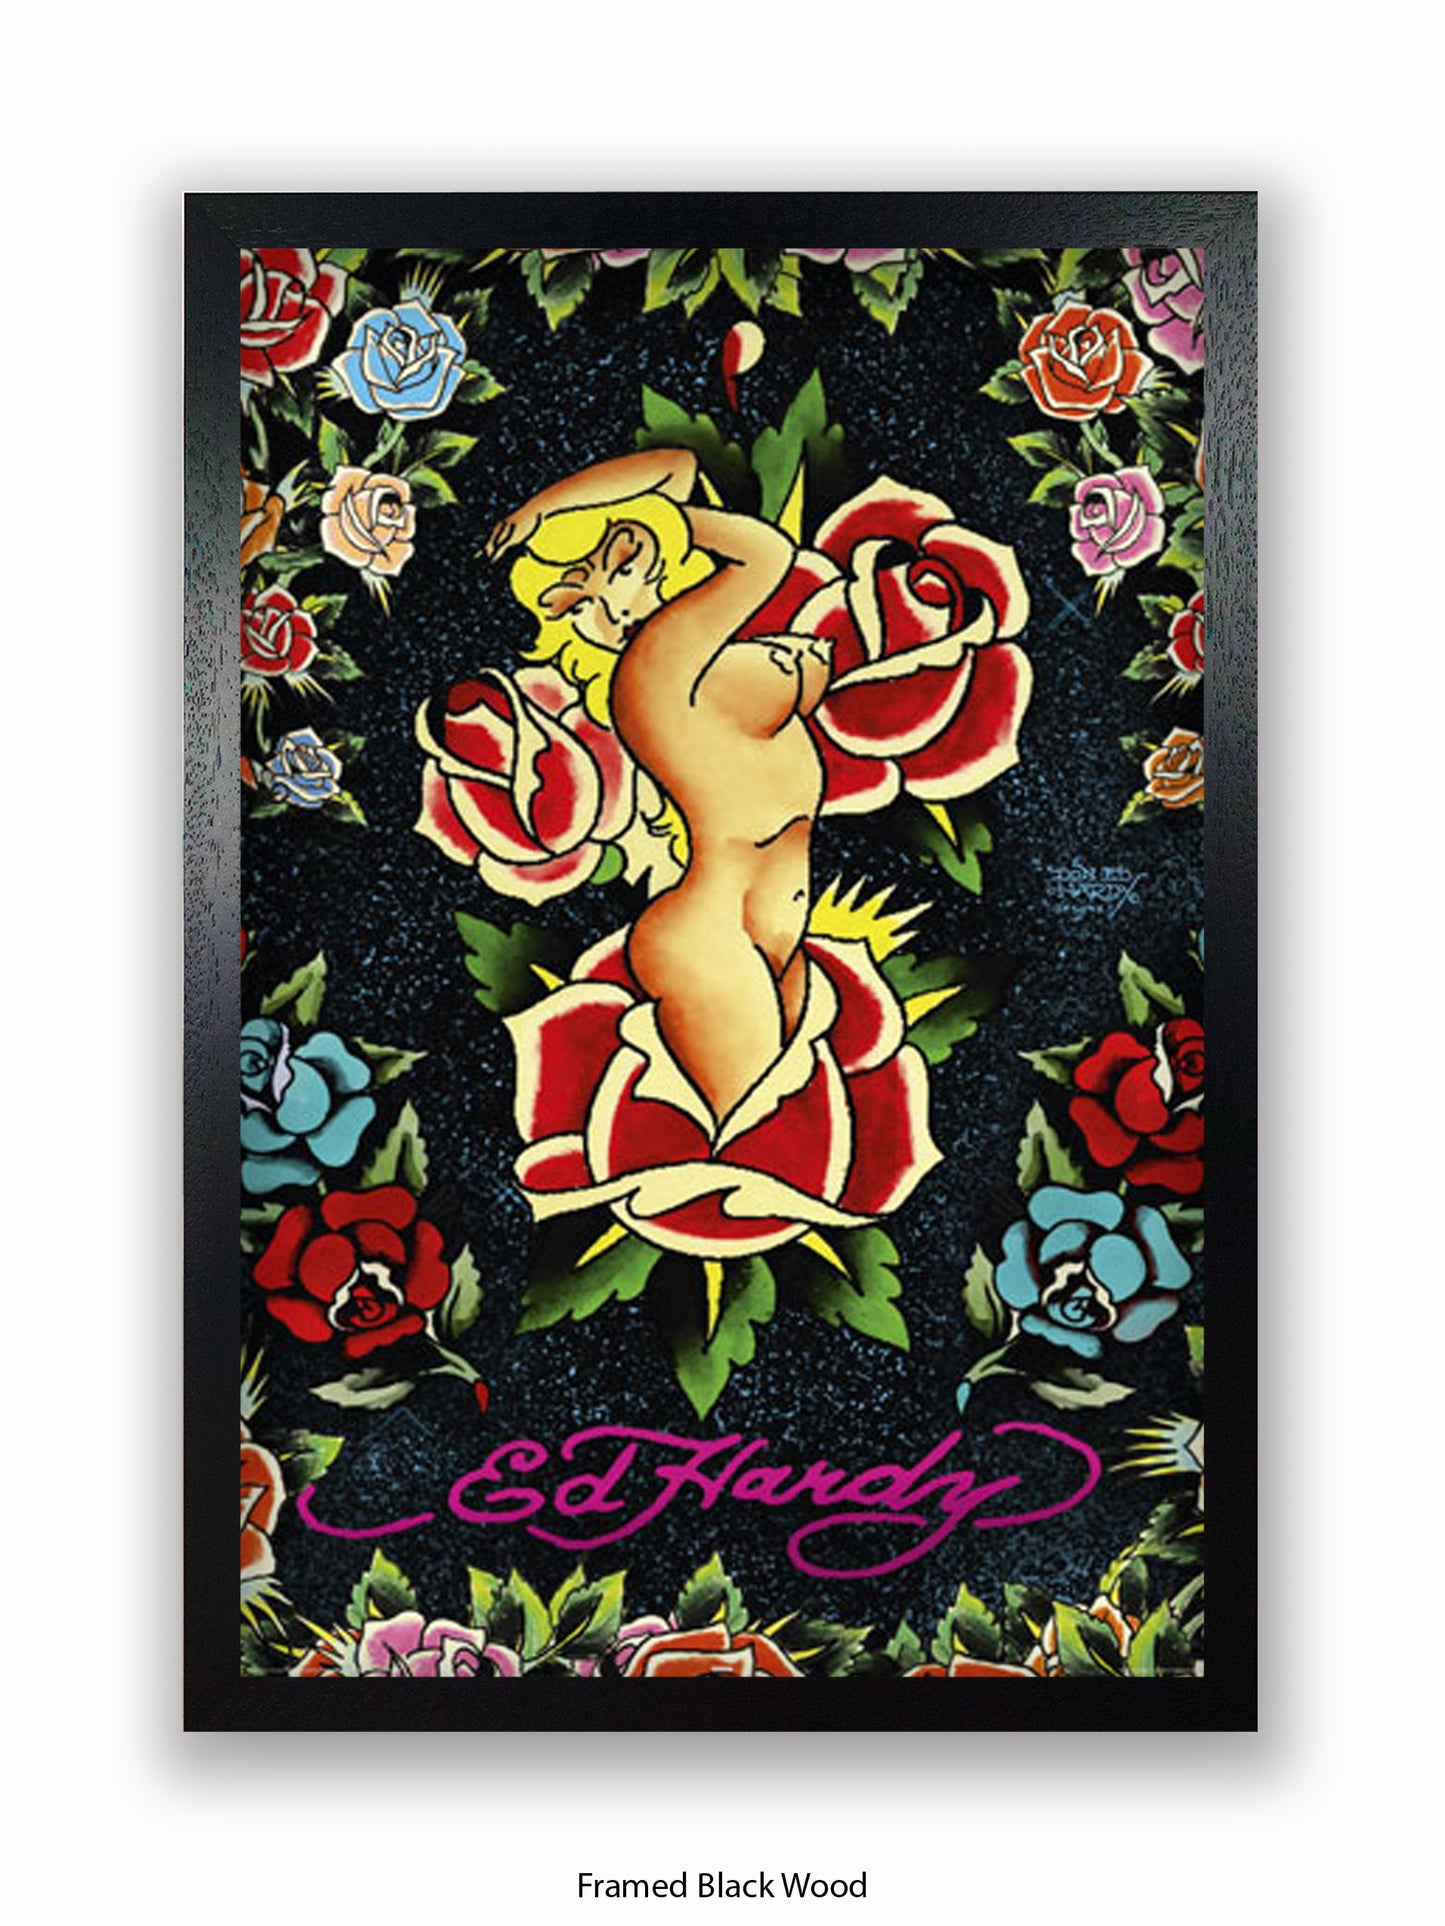 Ed Hardy Rose Pin Up Poster